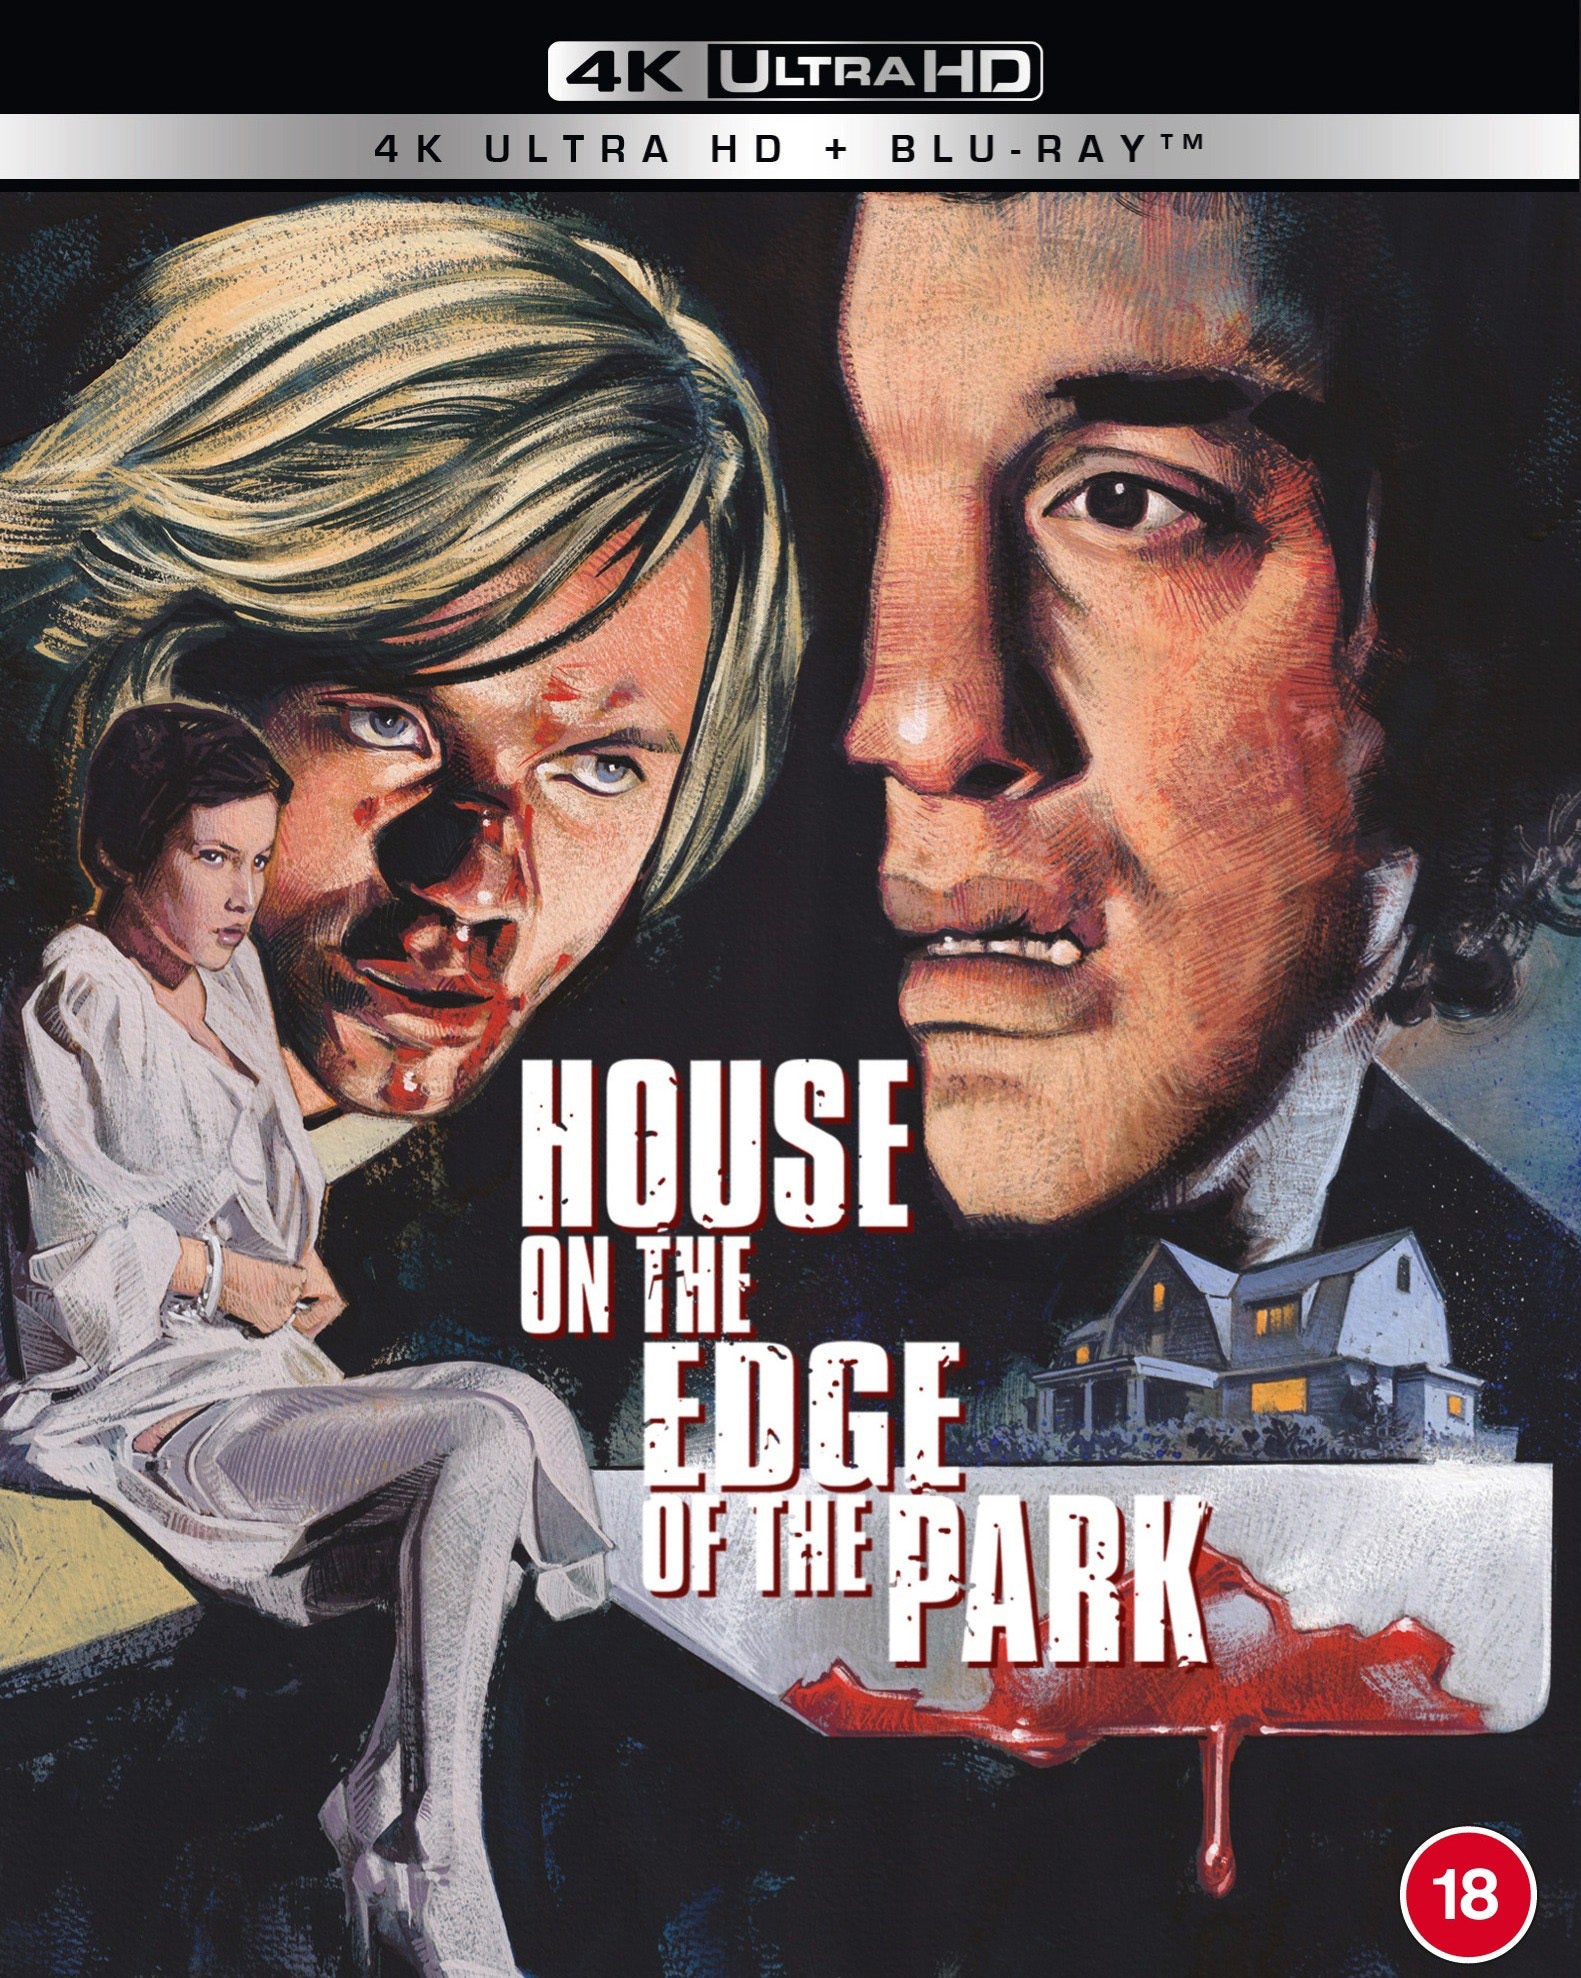 HOUSE ON THE EDGE OF THE PARK (REGION FREE IMPORT) 4K UHD/BLU-RAY